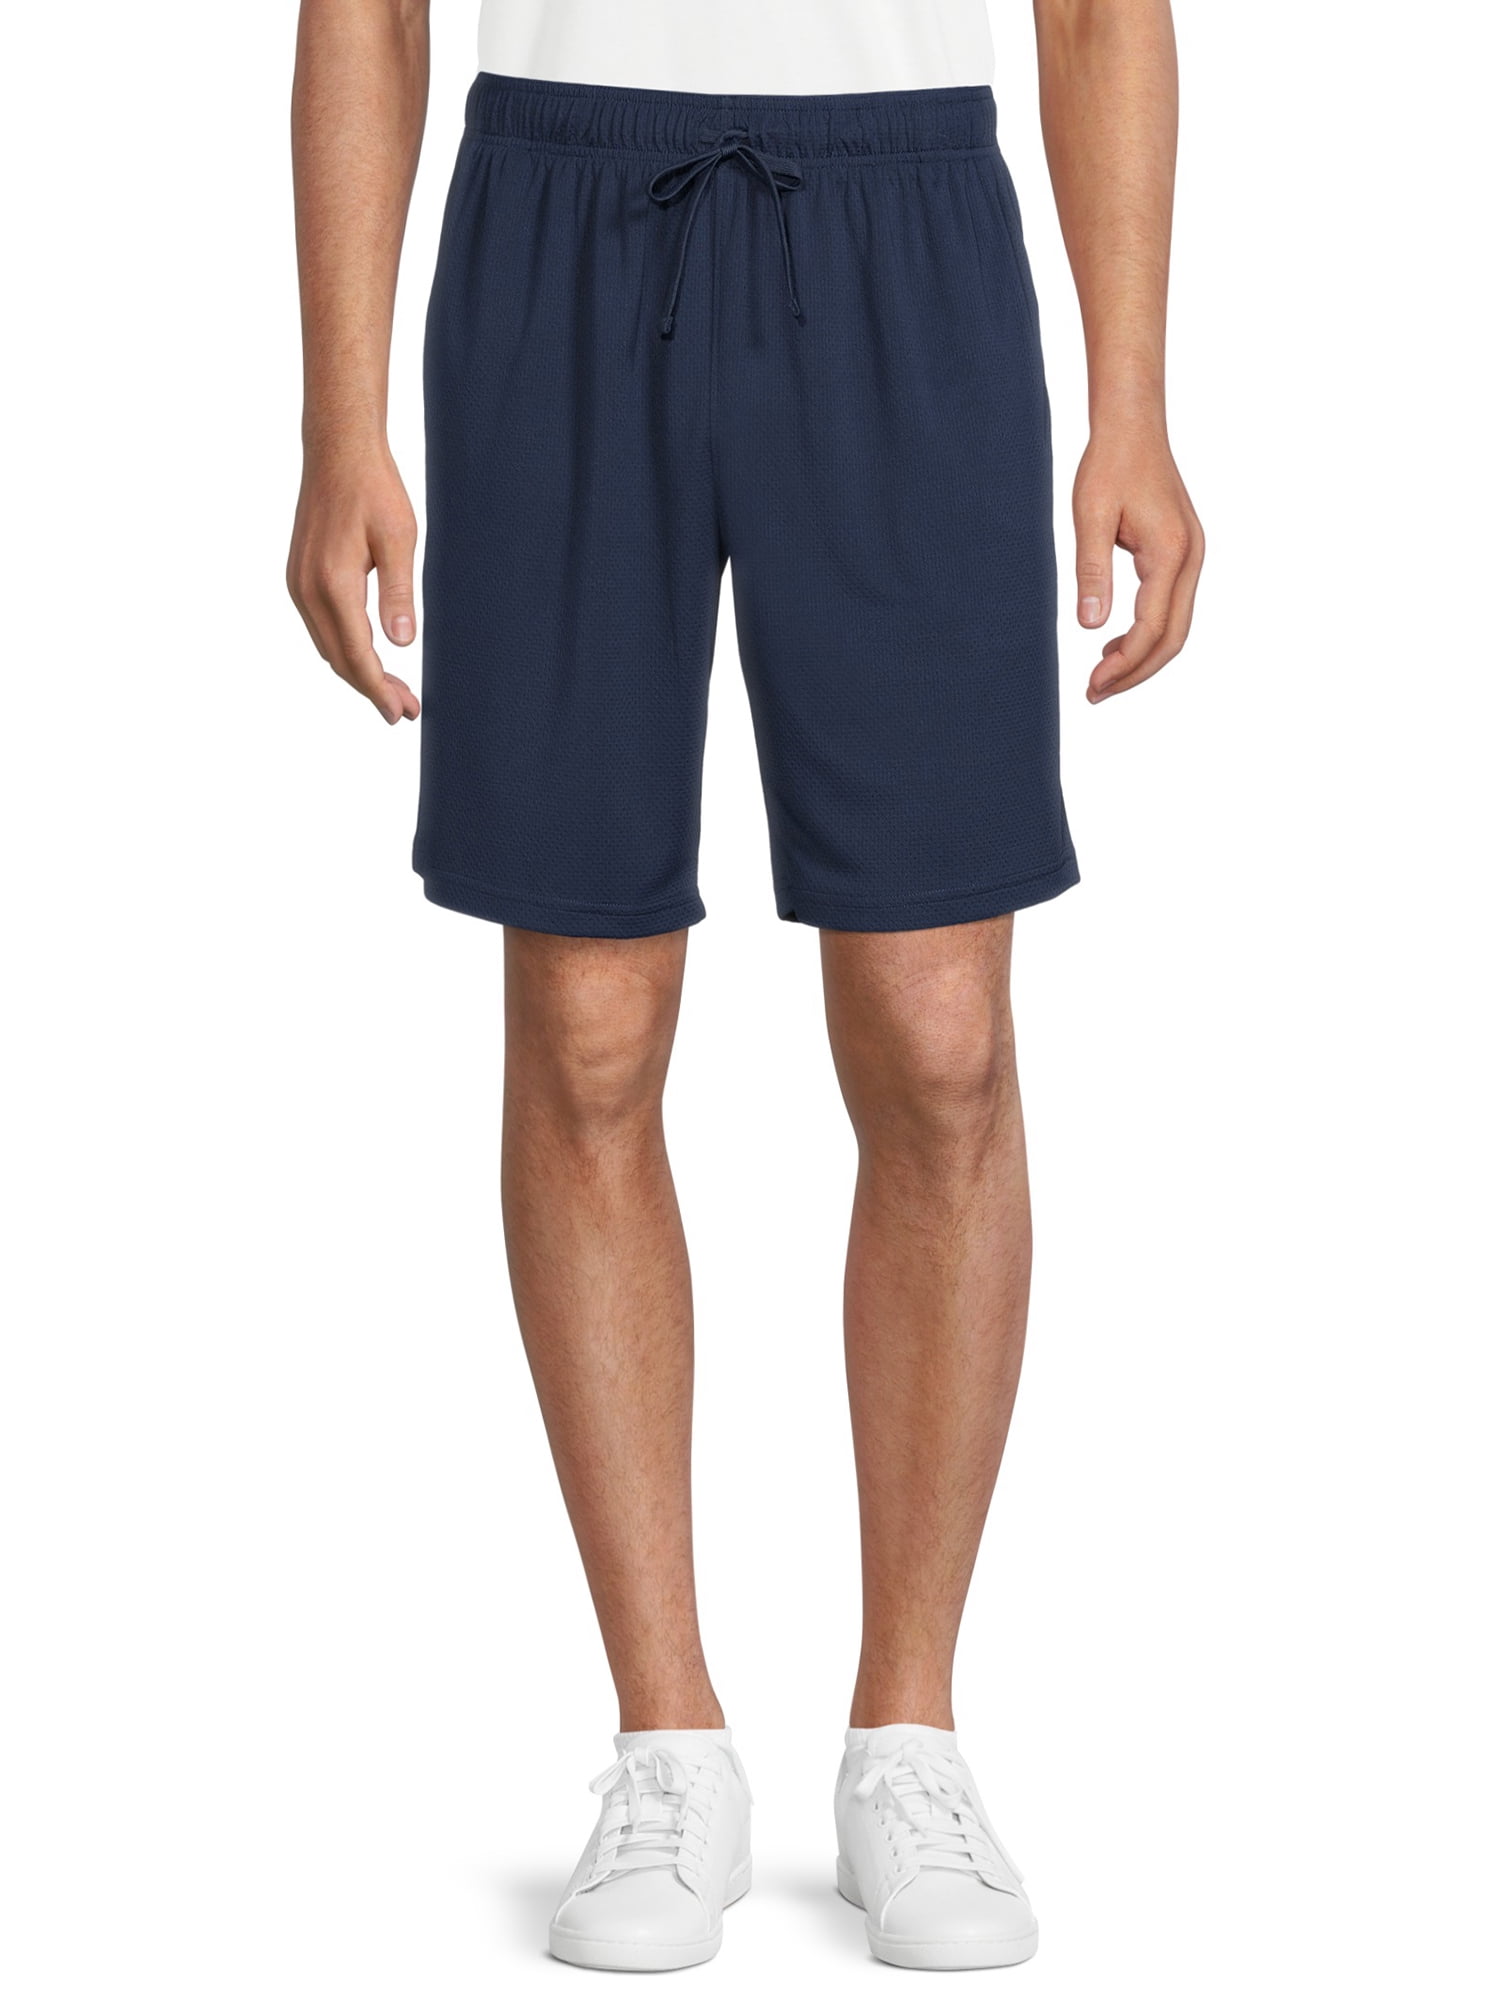 Athletic Works Men's and Big Men's Active Shorts, Sizes up to 5XL